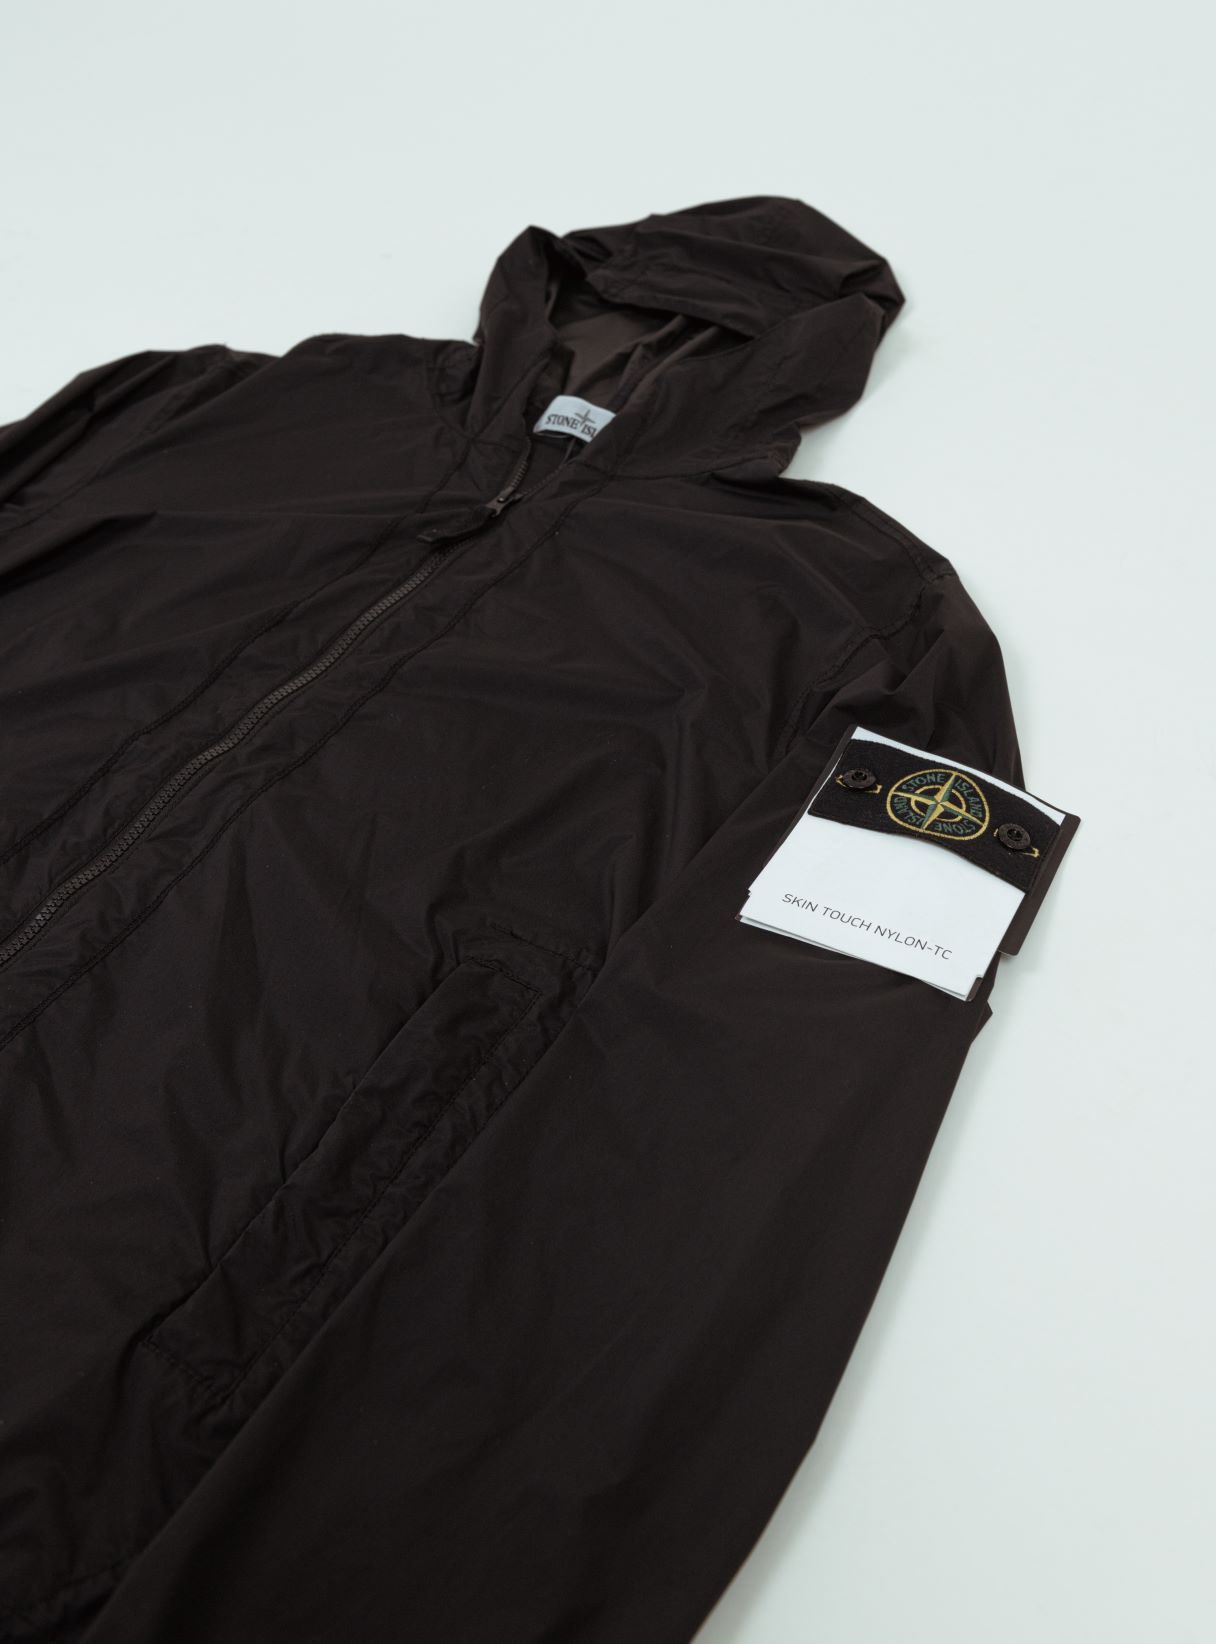 Liever landen Verkeersopstopping The Drip Hub on Twitter: "Another STONE ISLAND jacket, this time skin nylon  jacket 🔥🔥 . Unreal piece with tones of detailing . RRP £475 - our price  👀 https://t.co/glezmzfPWP https://t.co/MtgZBjMT5D" /